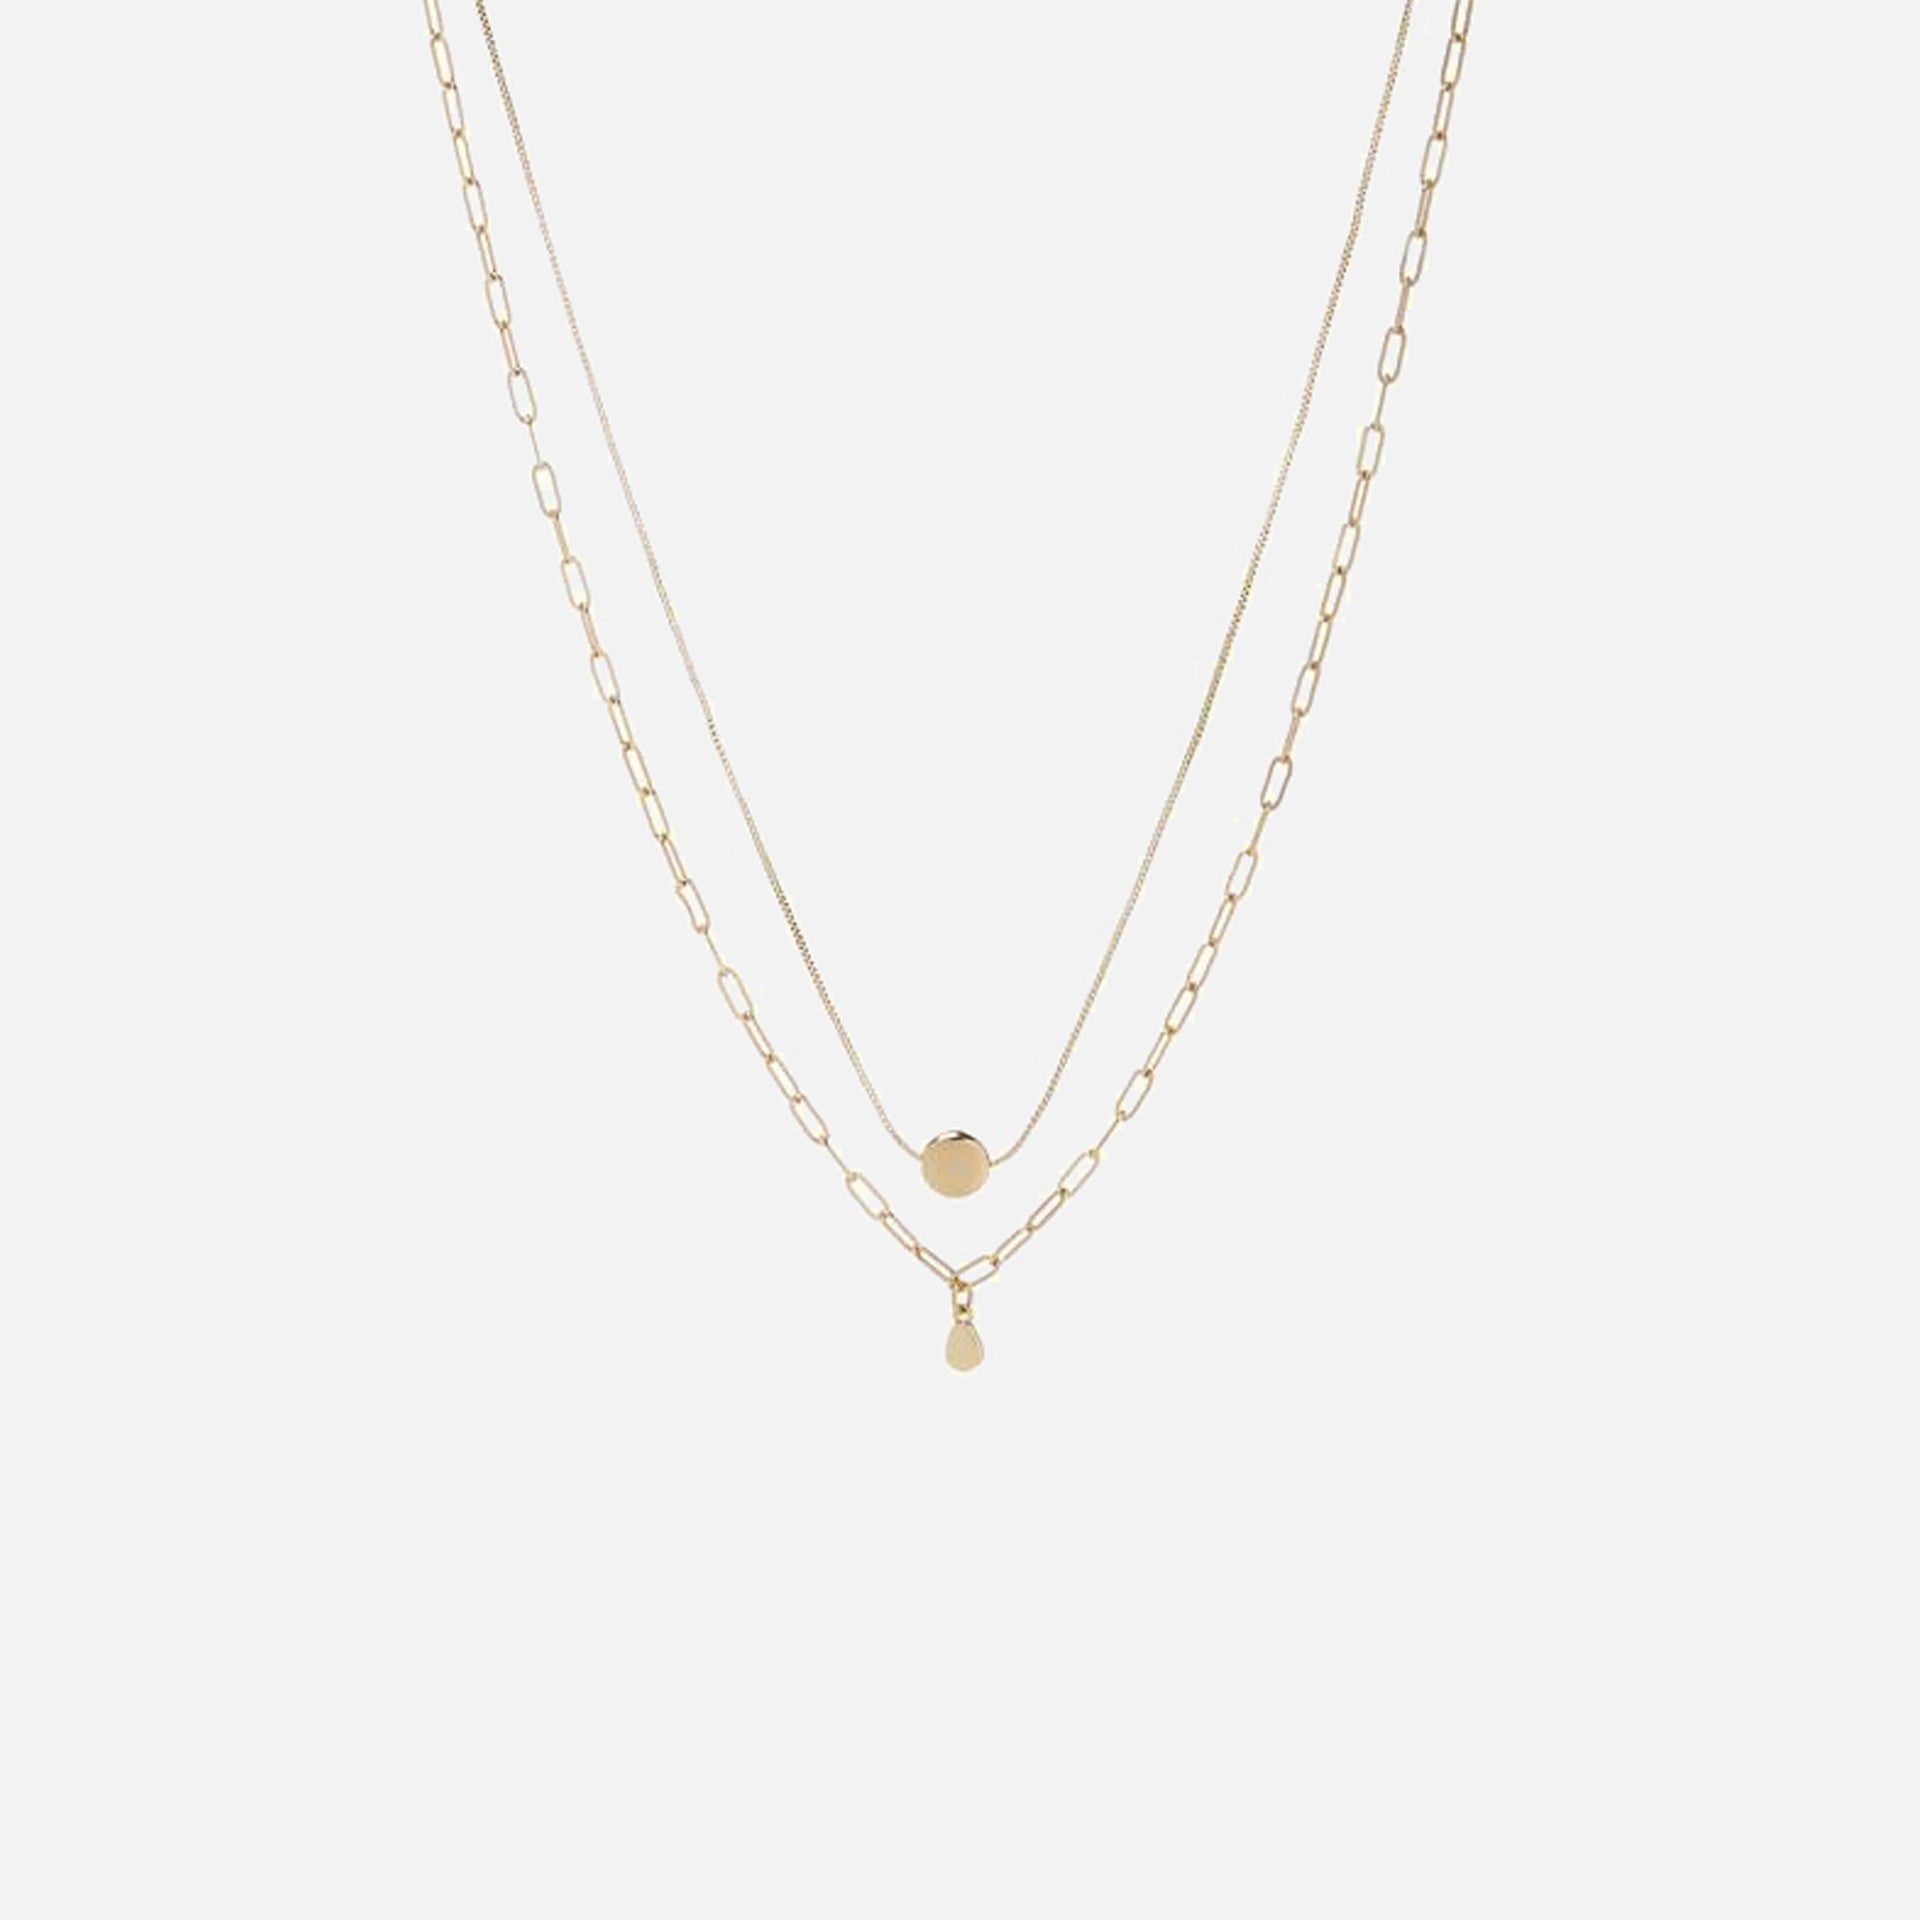 Luv AJ The Golden Nugget Double Charm Necklace - Gold